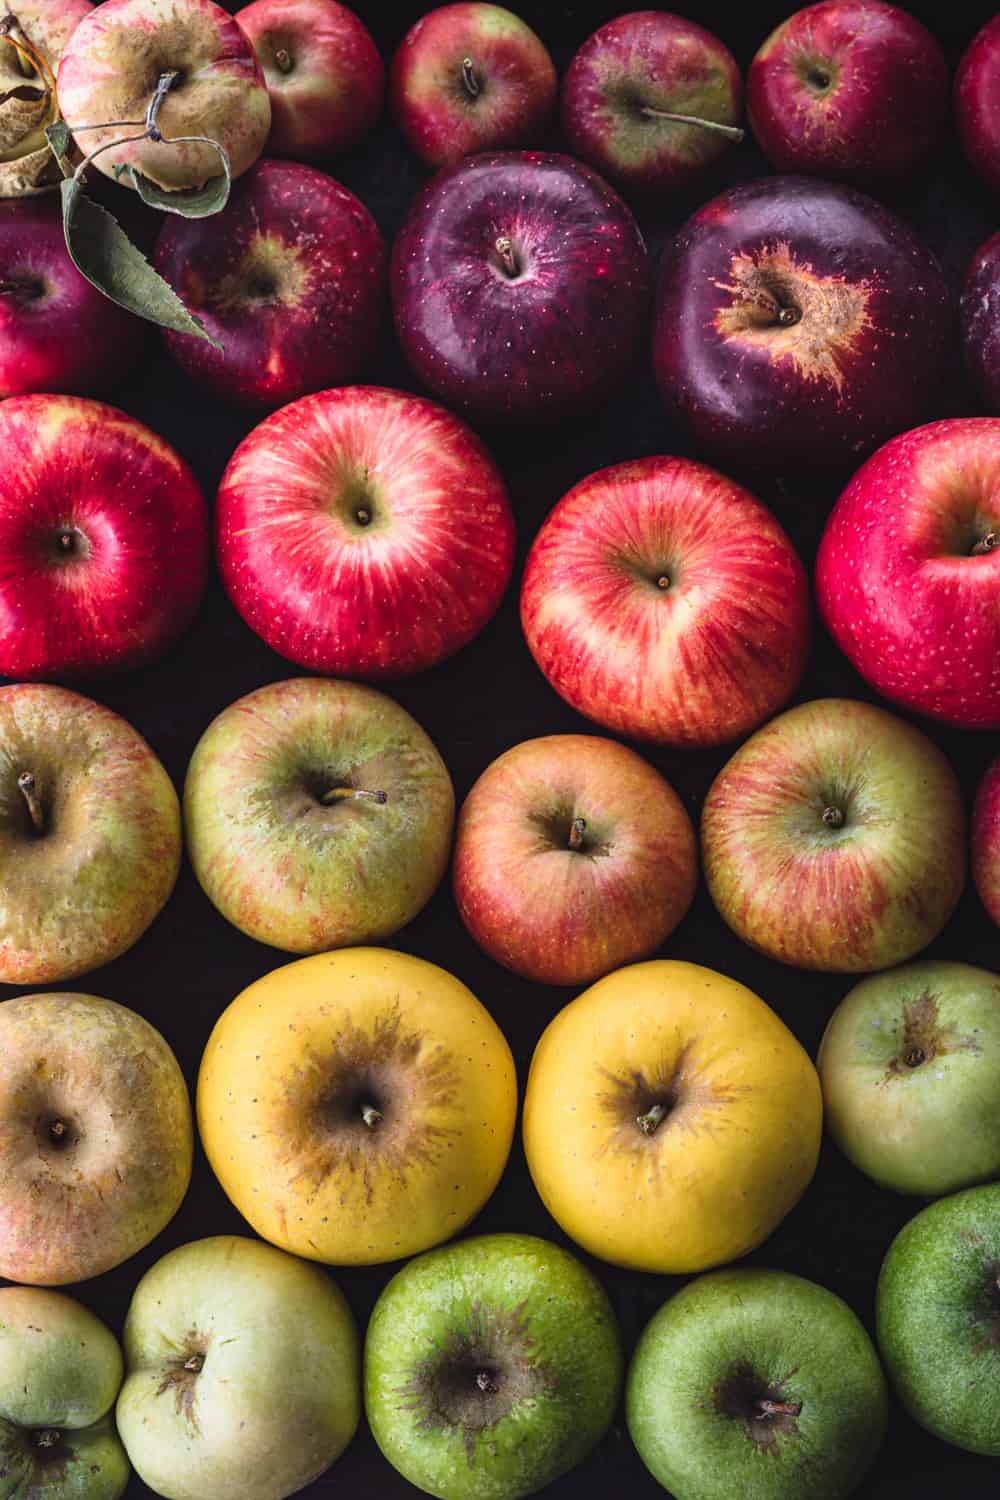 Apples arranged like a rainbow! There's red, purple, pink, yellow, green and hues in between; on a black background.